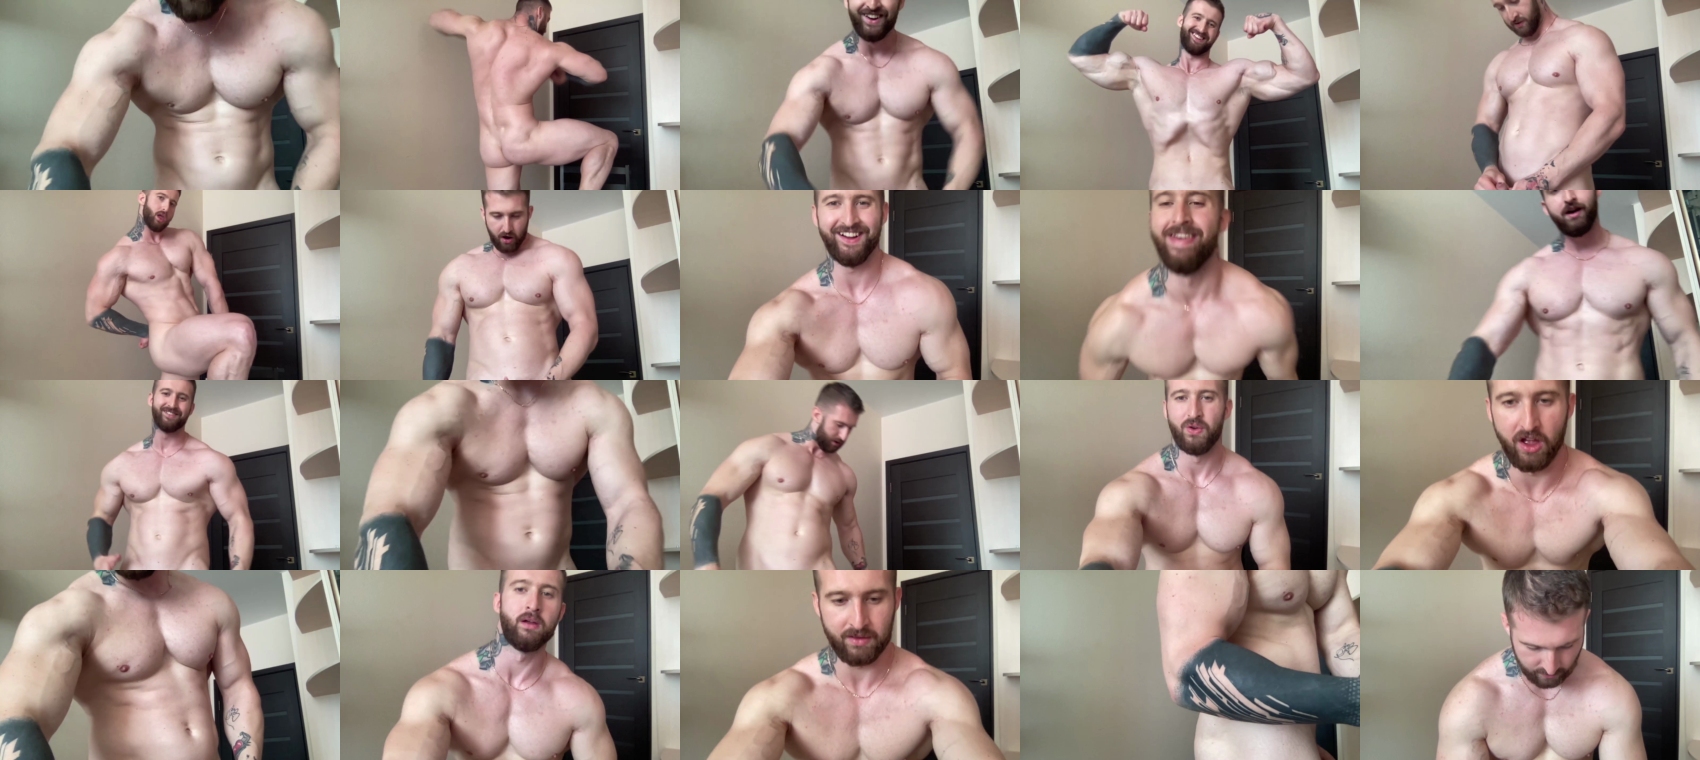 panda_muscle1 toy CAM SHOW @ Chaturbate 20-06-2022